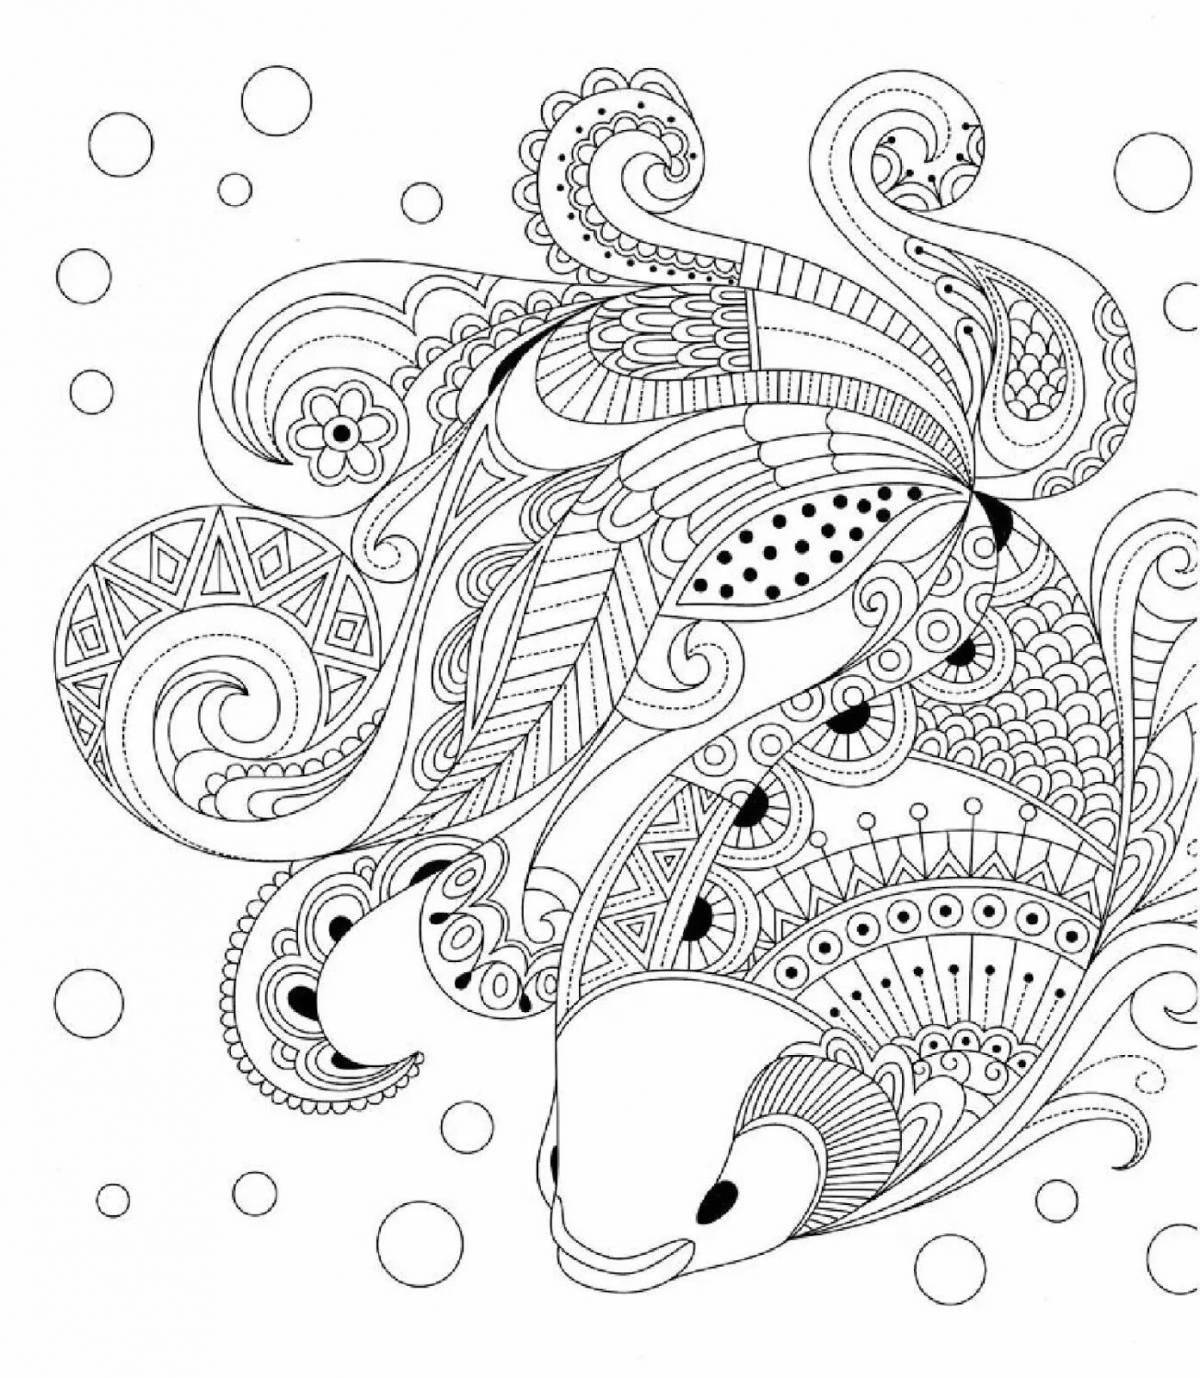 Peaceful coloring relaxing living patterns